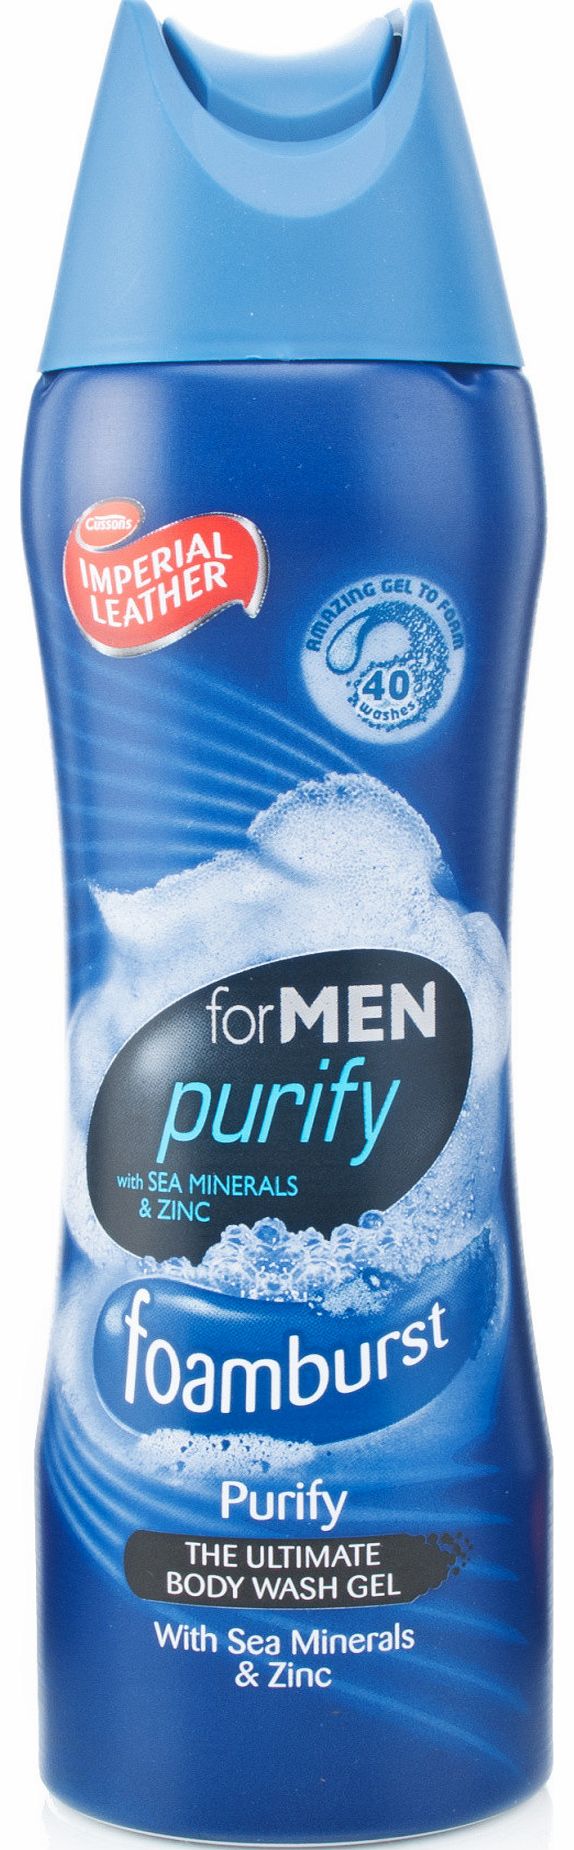 Imperial Leather Foamburst Purify for Men Shower